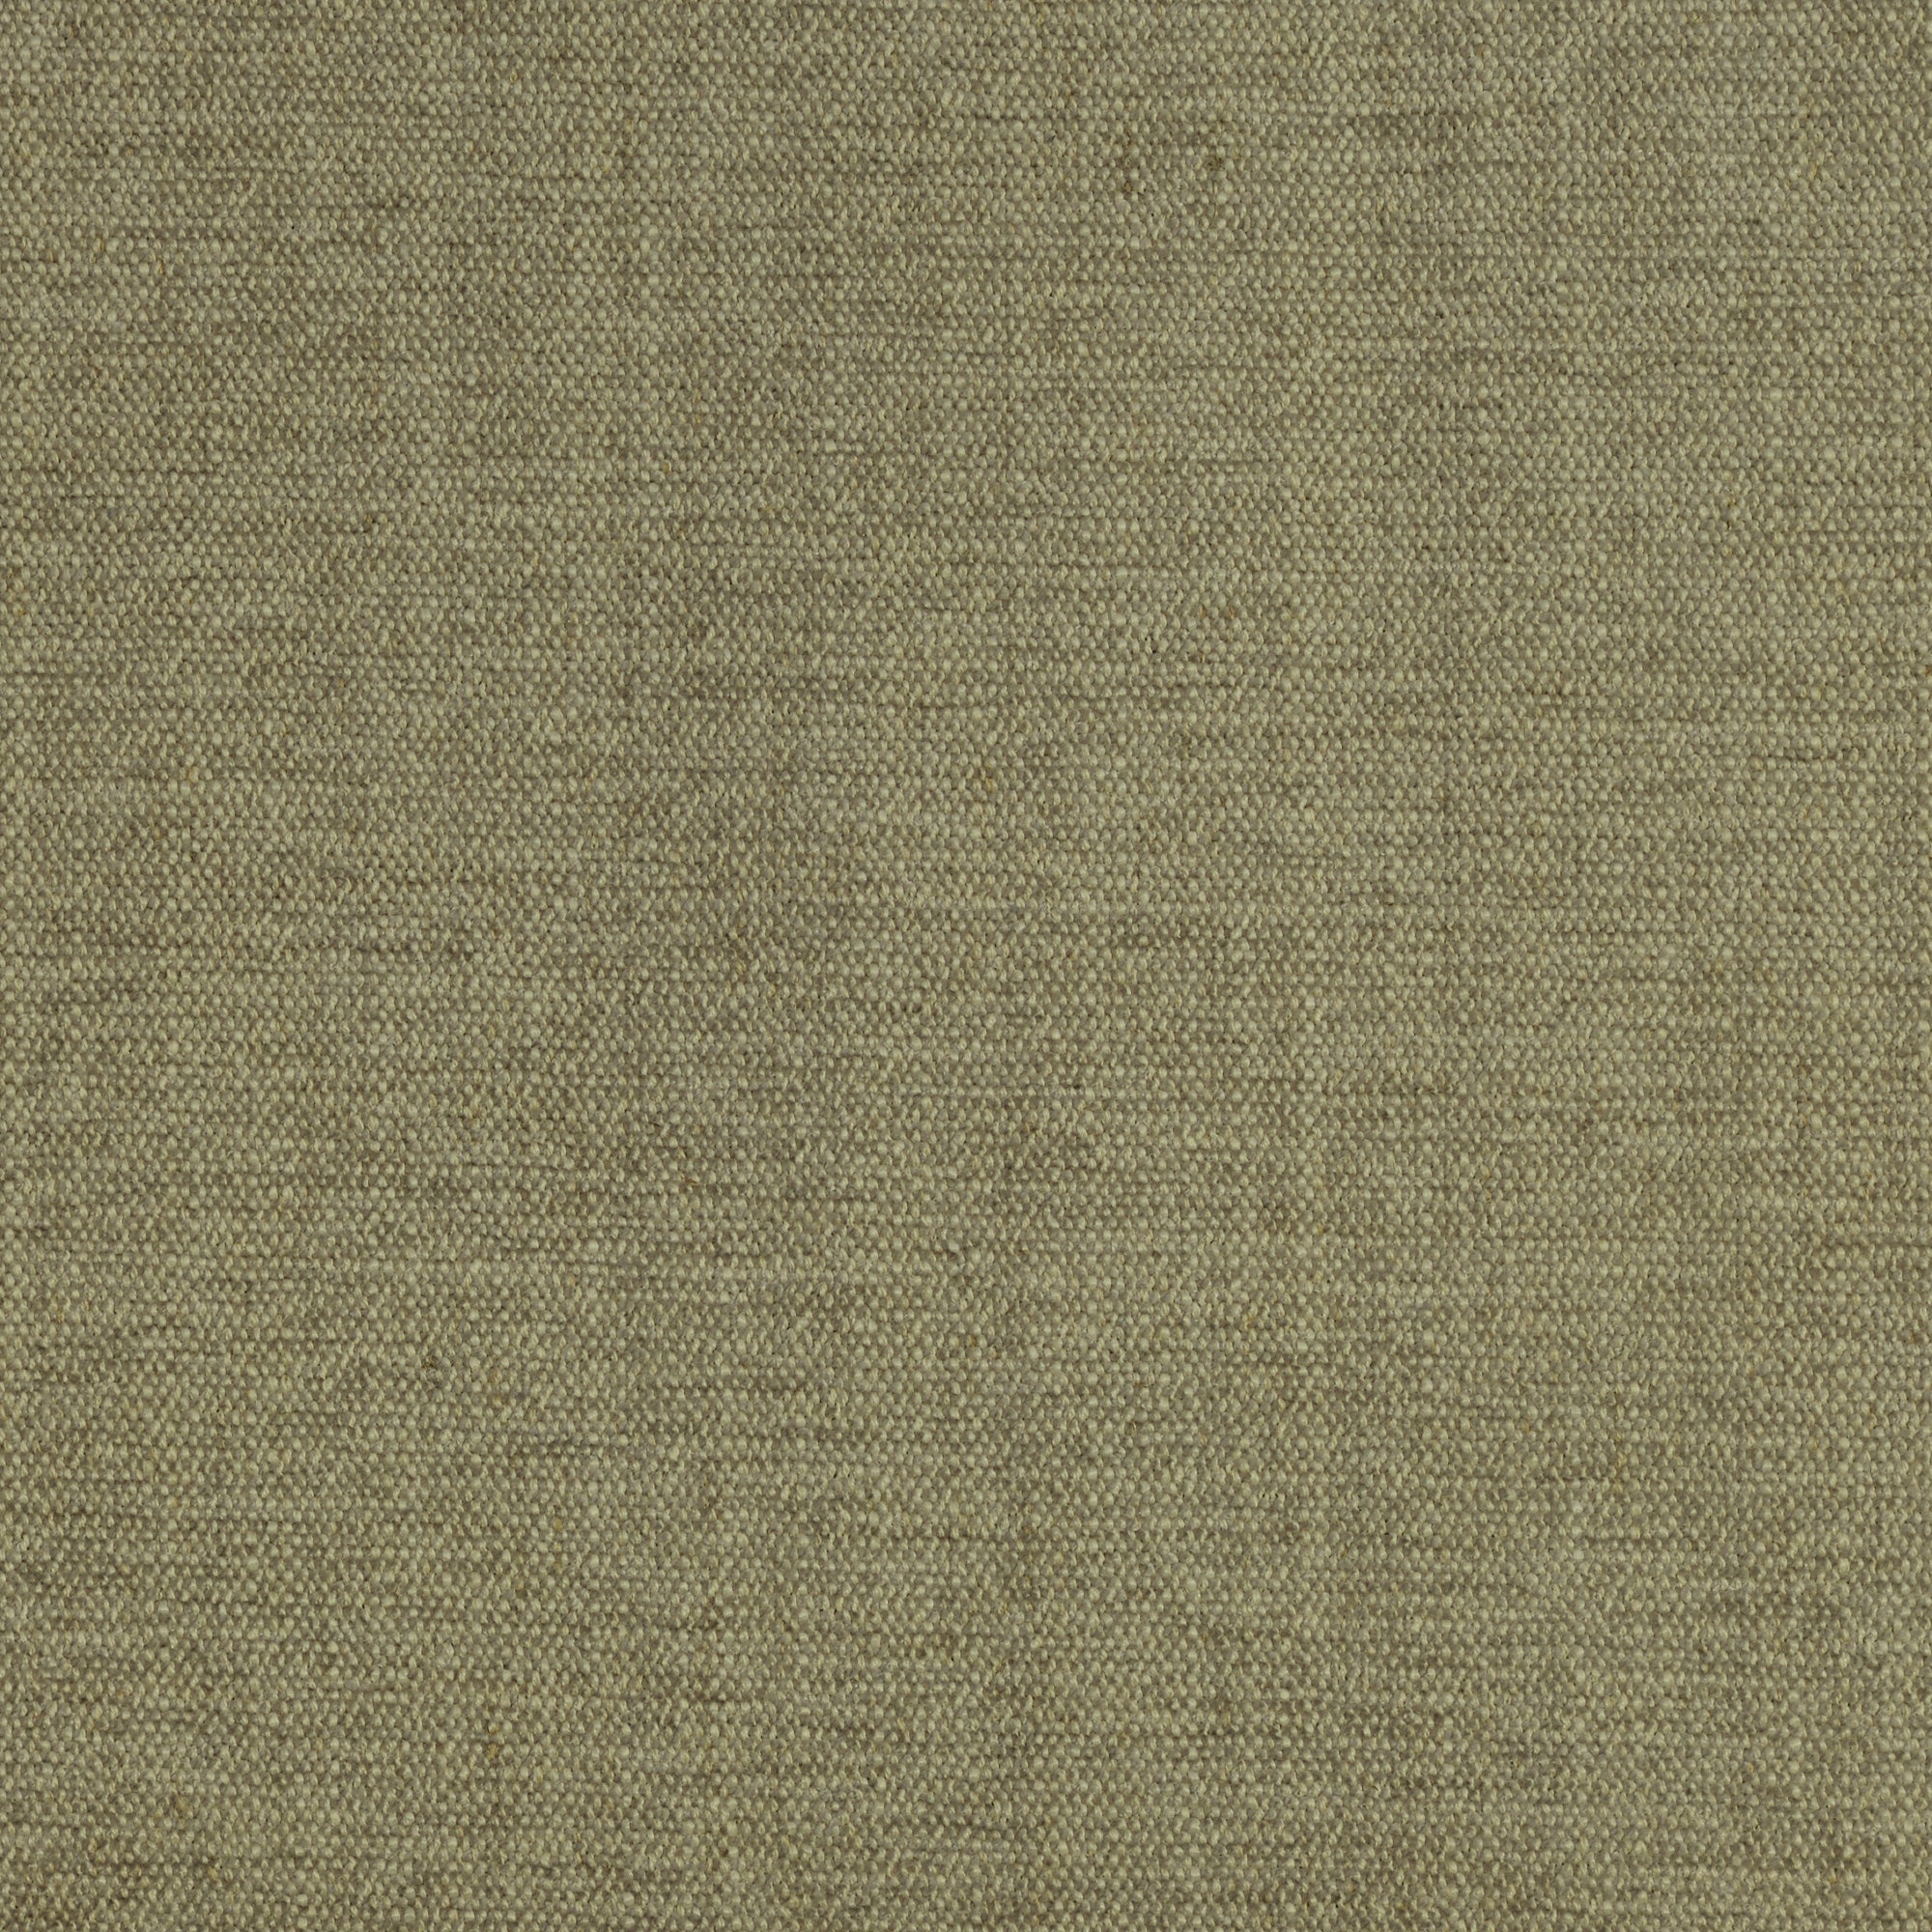 Bronson - Linen Blend Textured Chenille Upholstery Fabric by the Yard